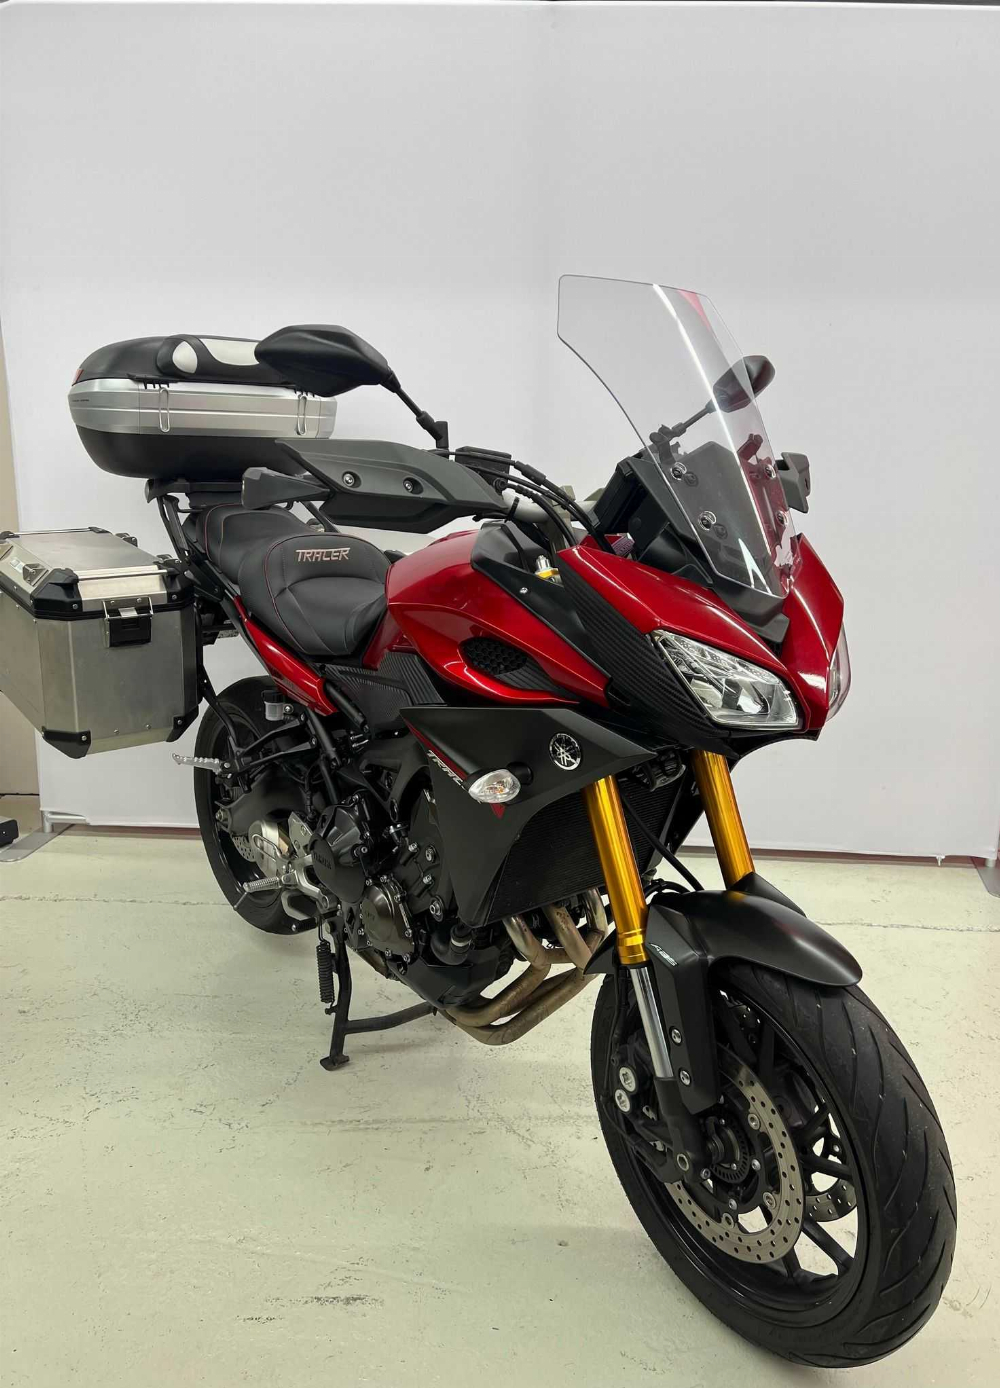 Yamaha Tracer 900 (MT09TRA) 2016 vue 3/4 droite